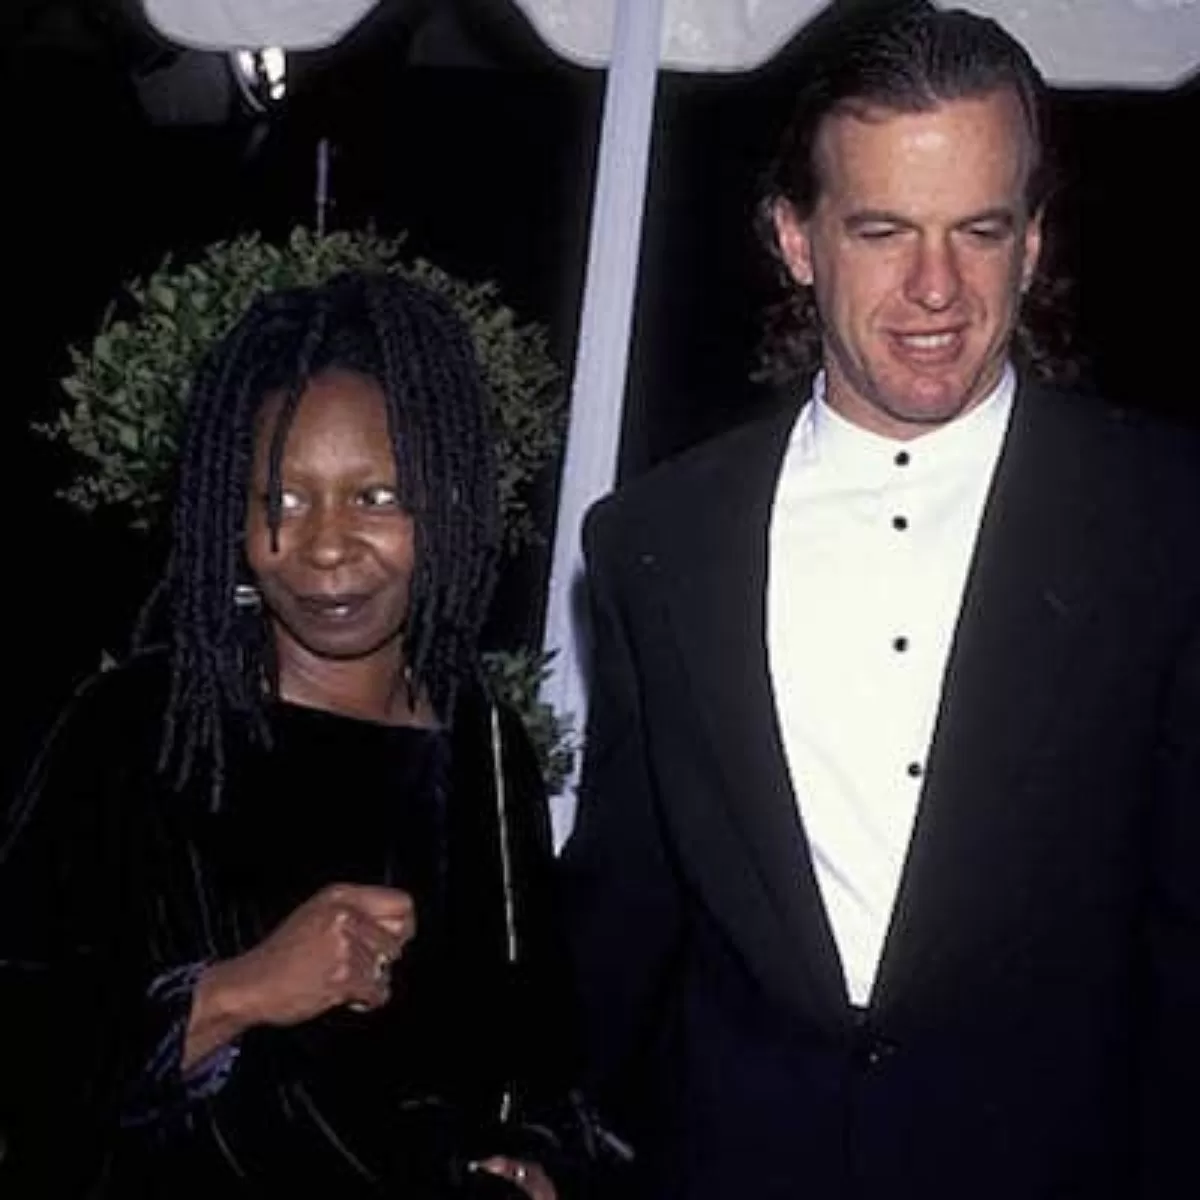 Lyle Trachtenberg: Union With Globally Acclaimed And Multi-Award-Winning Actress Whoopi Goldberg